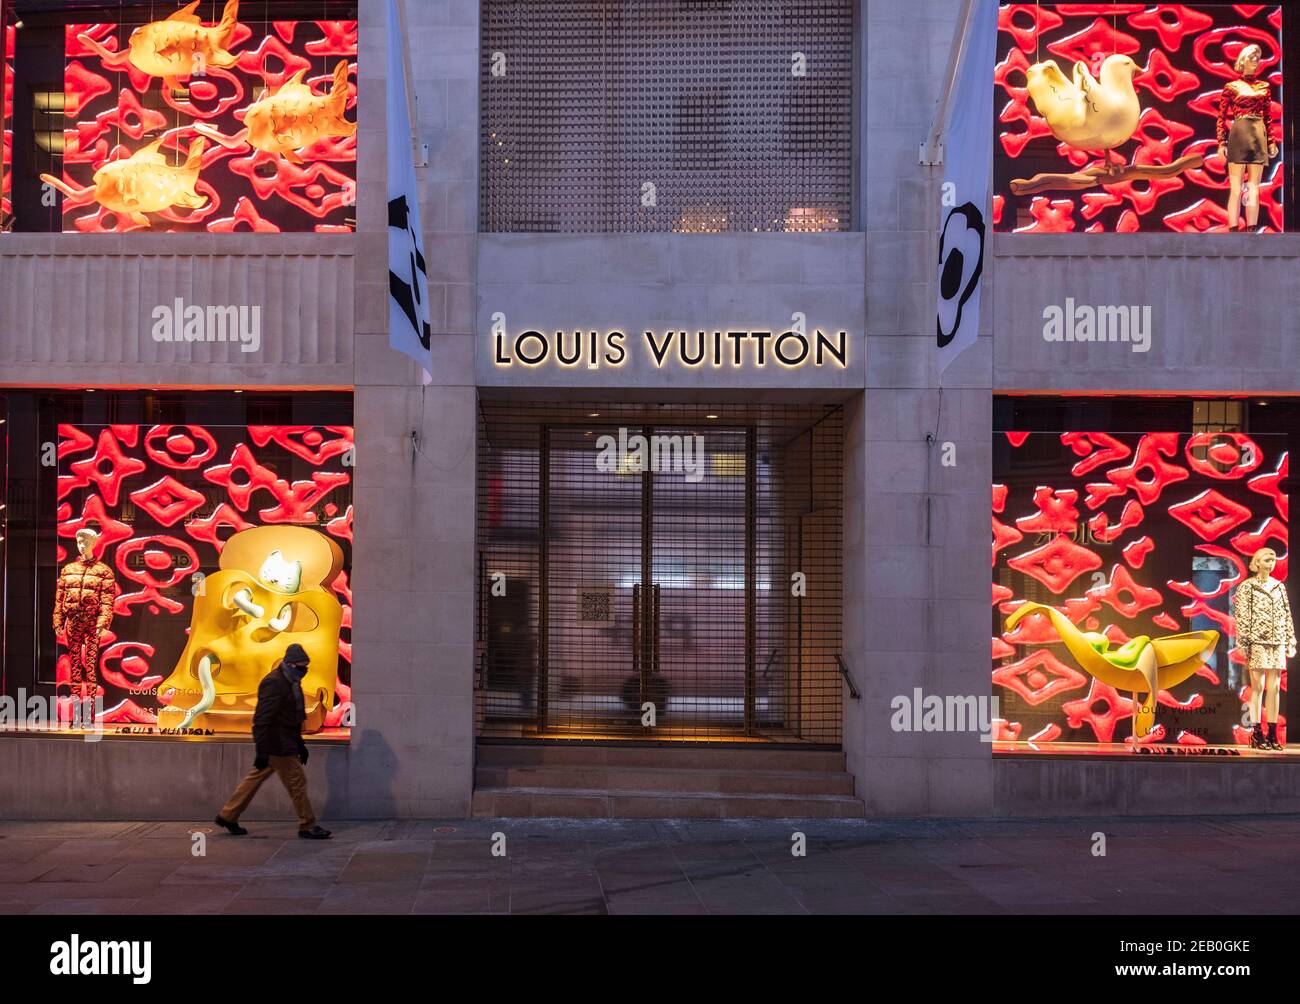 London, UK. 10th Feb, 2021. A man walking past the Louis Vuitton in London, during the nationwide lockdown. Louis Vuitton commonly known as Louis Vuitton or shortened to is